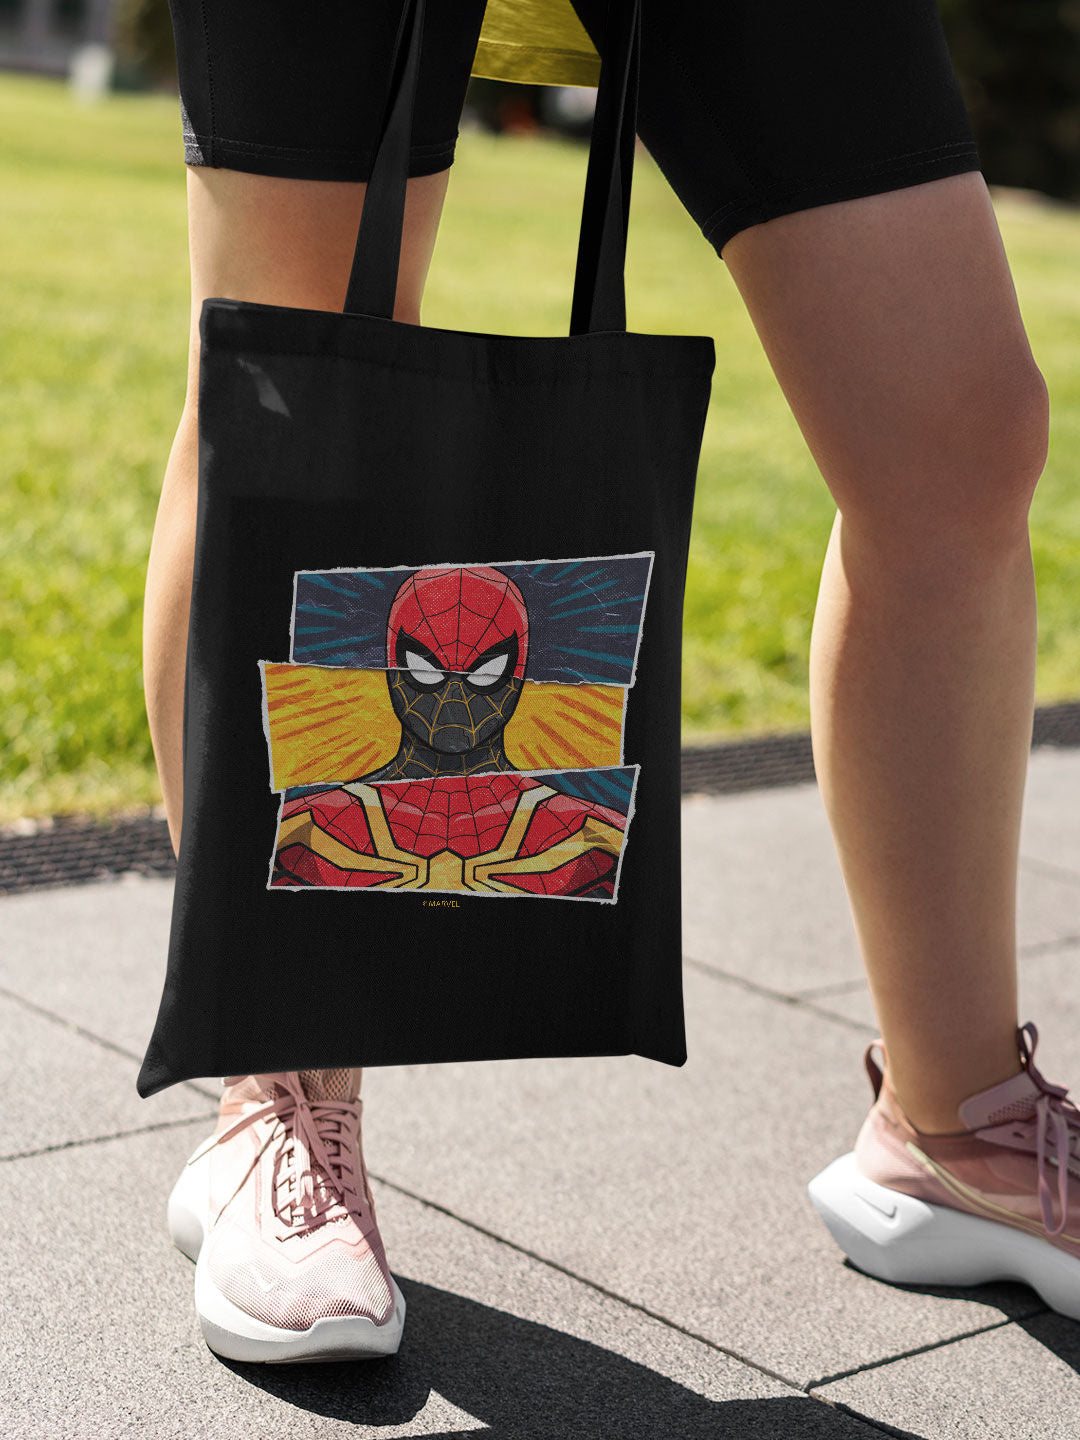 Spiderman Engage Casual Tote Bag - Polycotton - Black